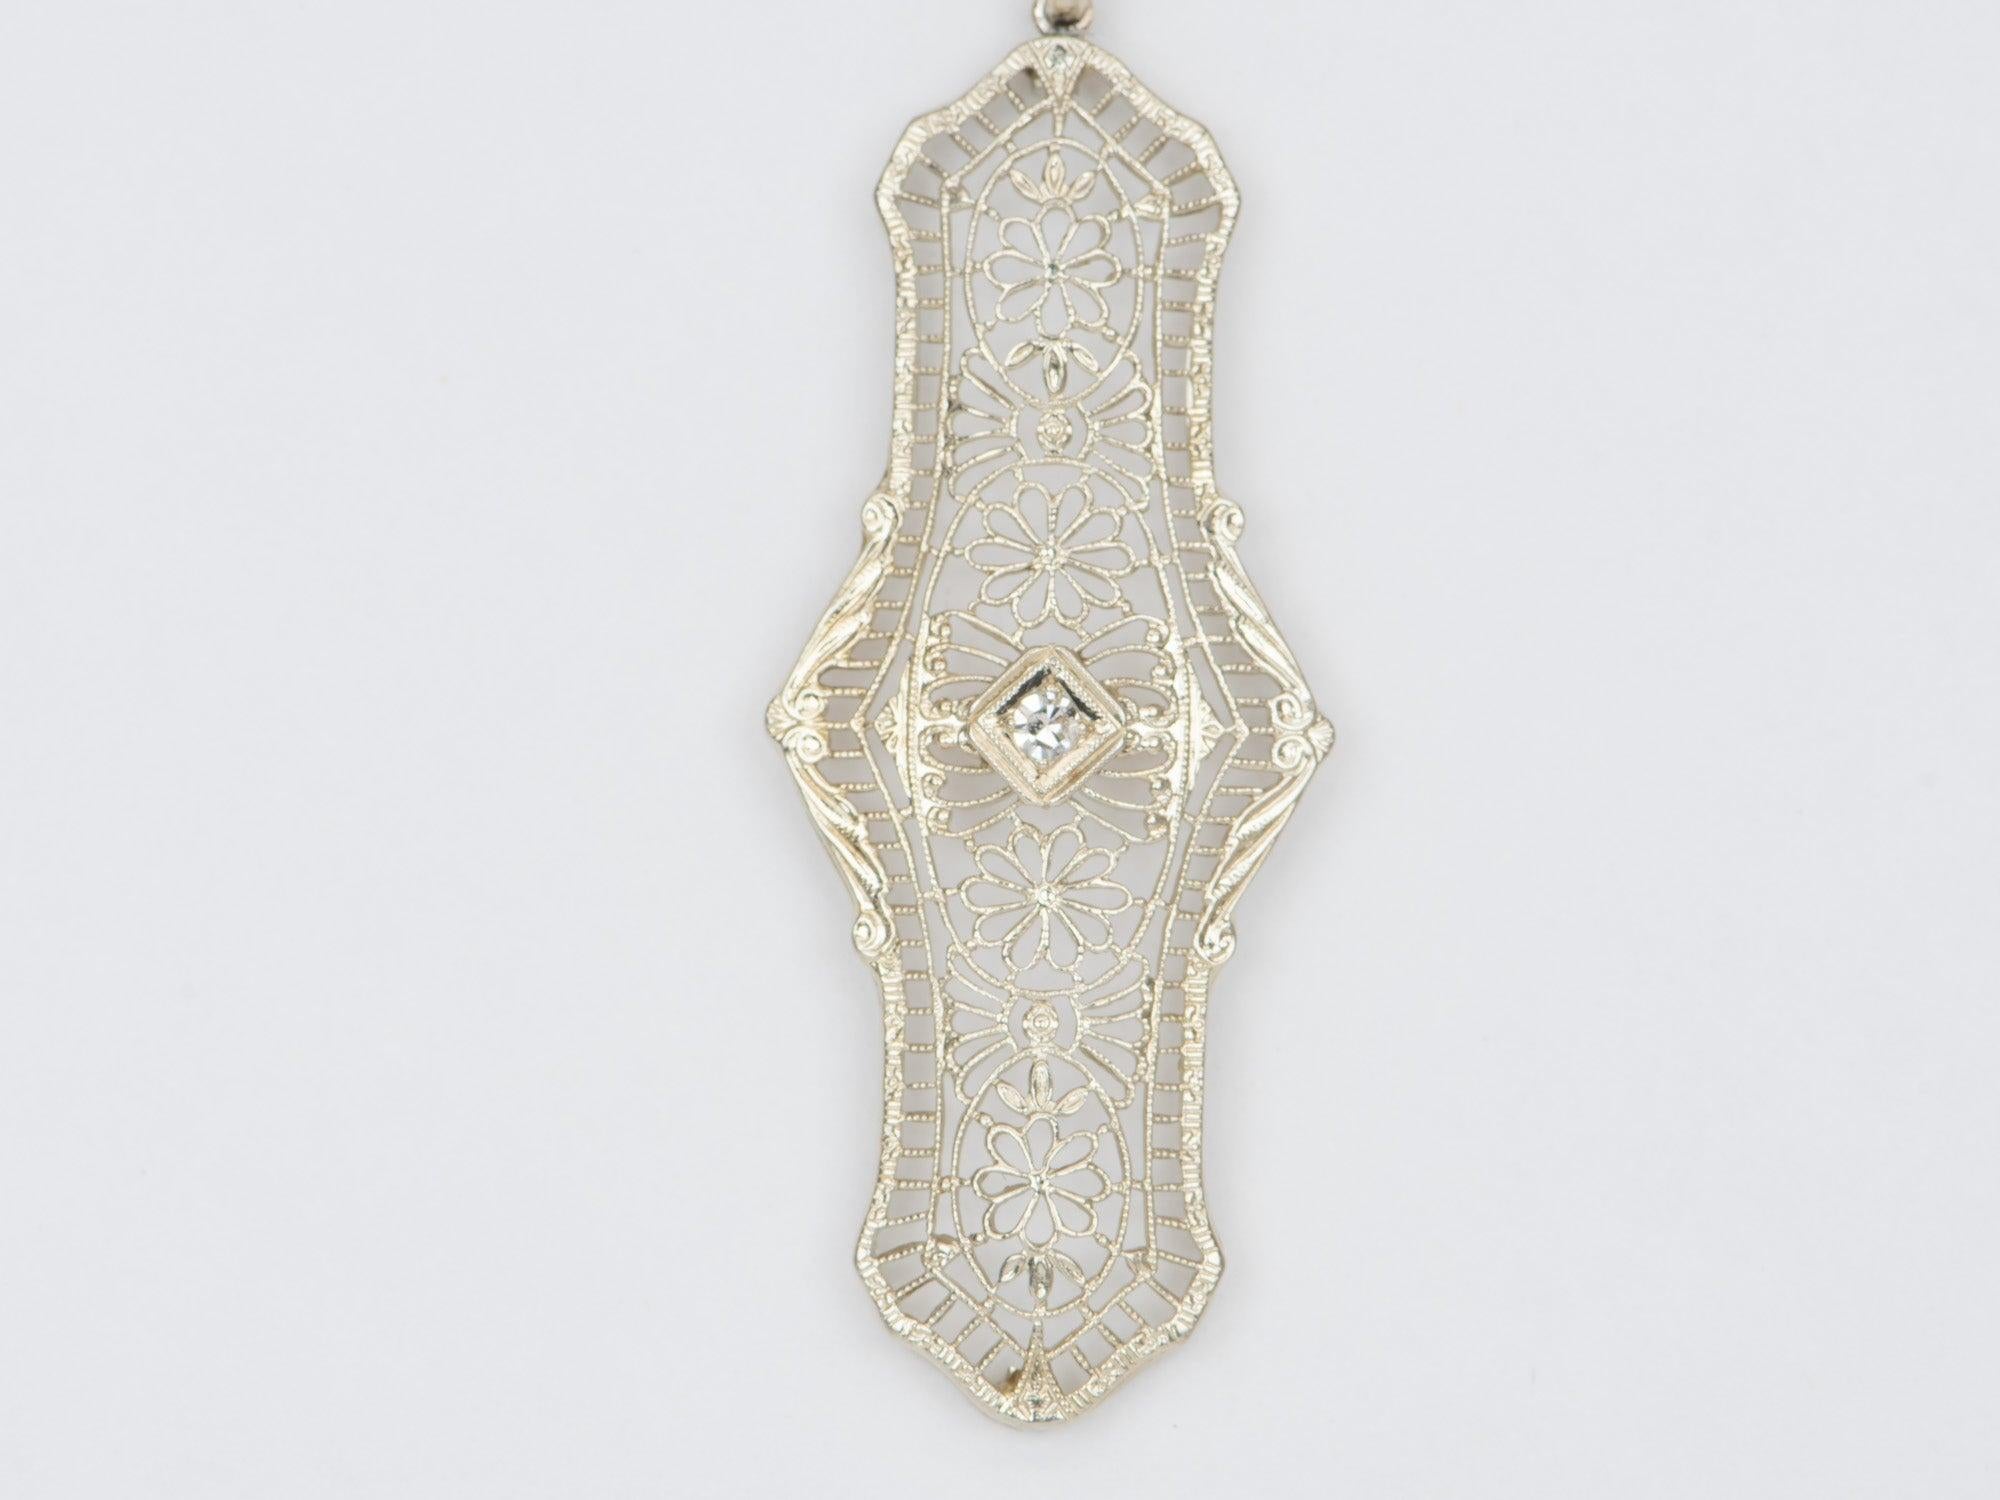 ♥ Solid 14K white gold vintage pin converted into a pendant
♥ Art-deco style with delicate filigrees in an elongated shape
♥ This measures 47.7mm in length, 19.6mm in width, and 4.5mm thick


♥ Material: Genuine 14K gold
♥ Gemstone: Natural